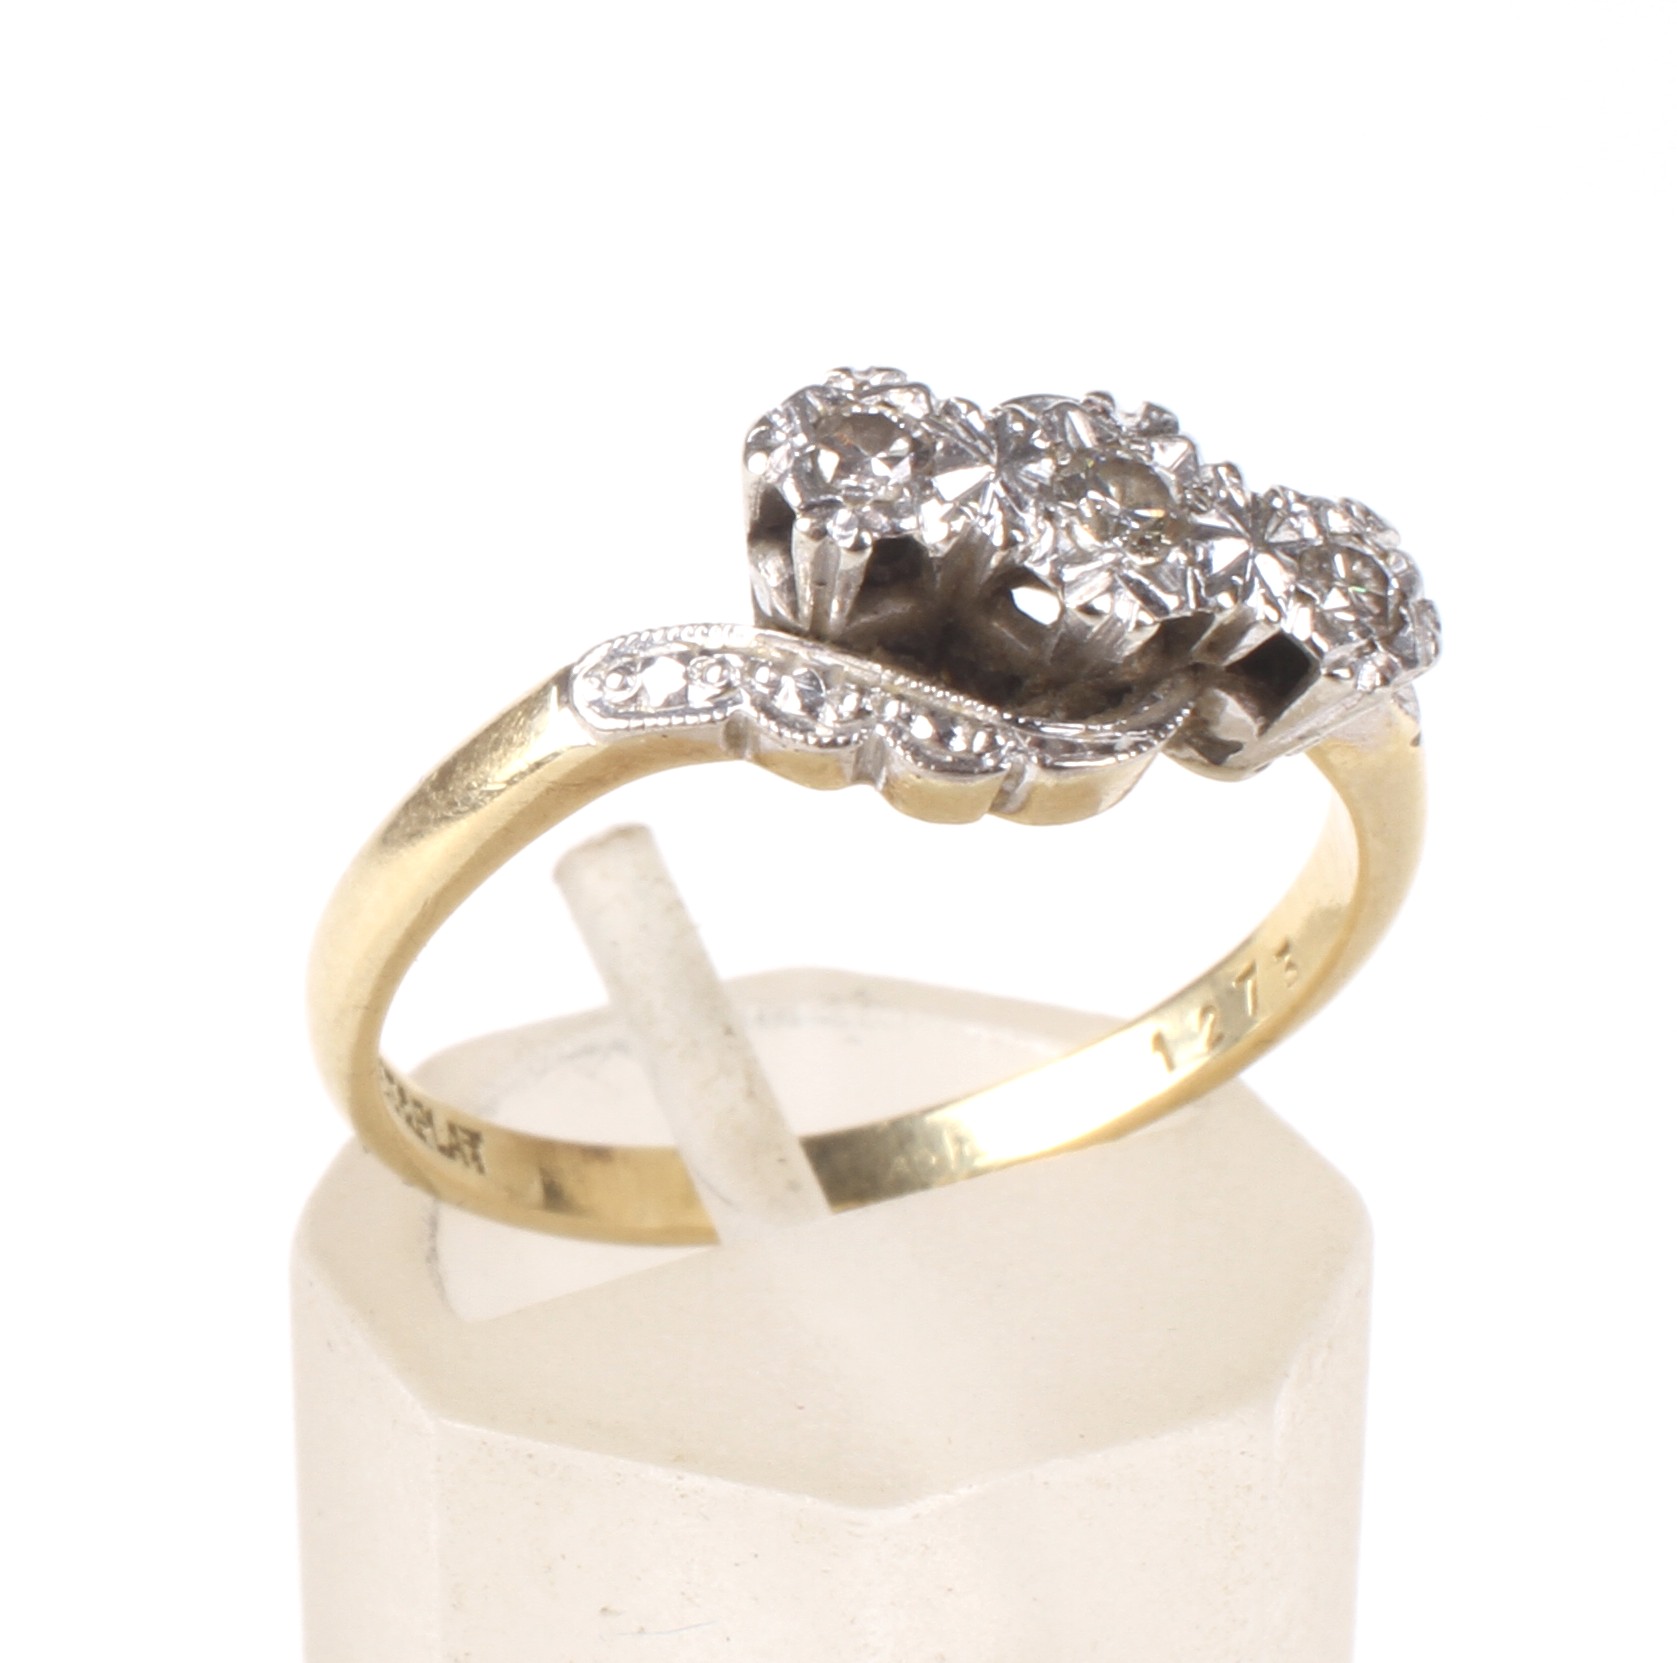 A mid 20th century gold and diamond three stone cross-over ring.